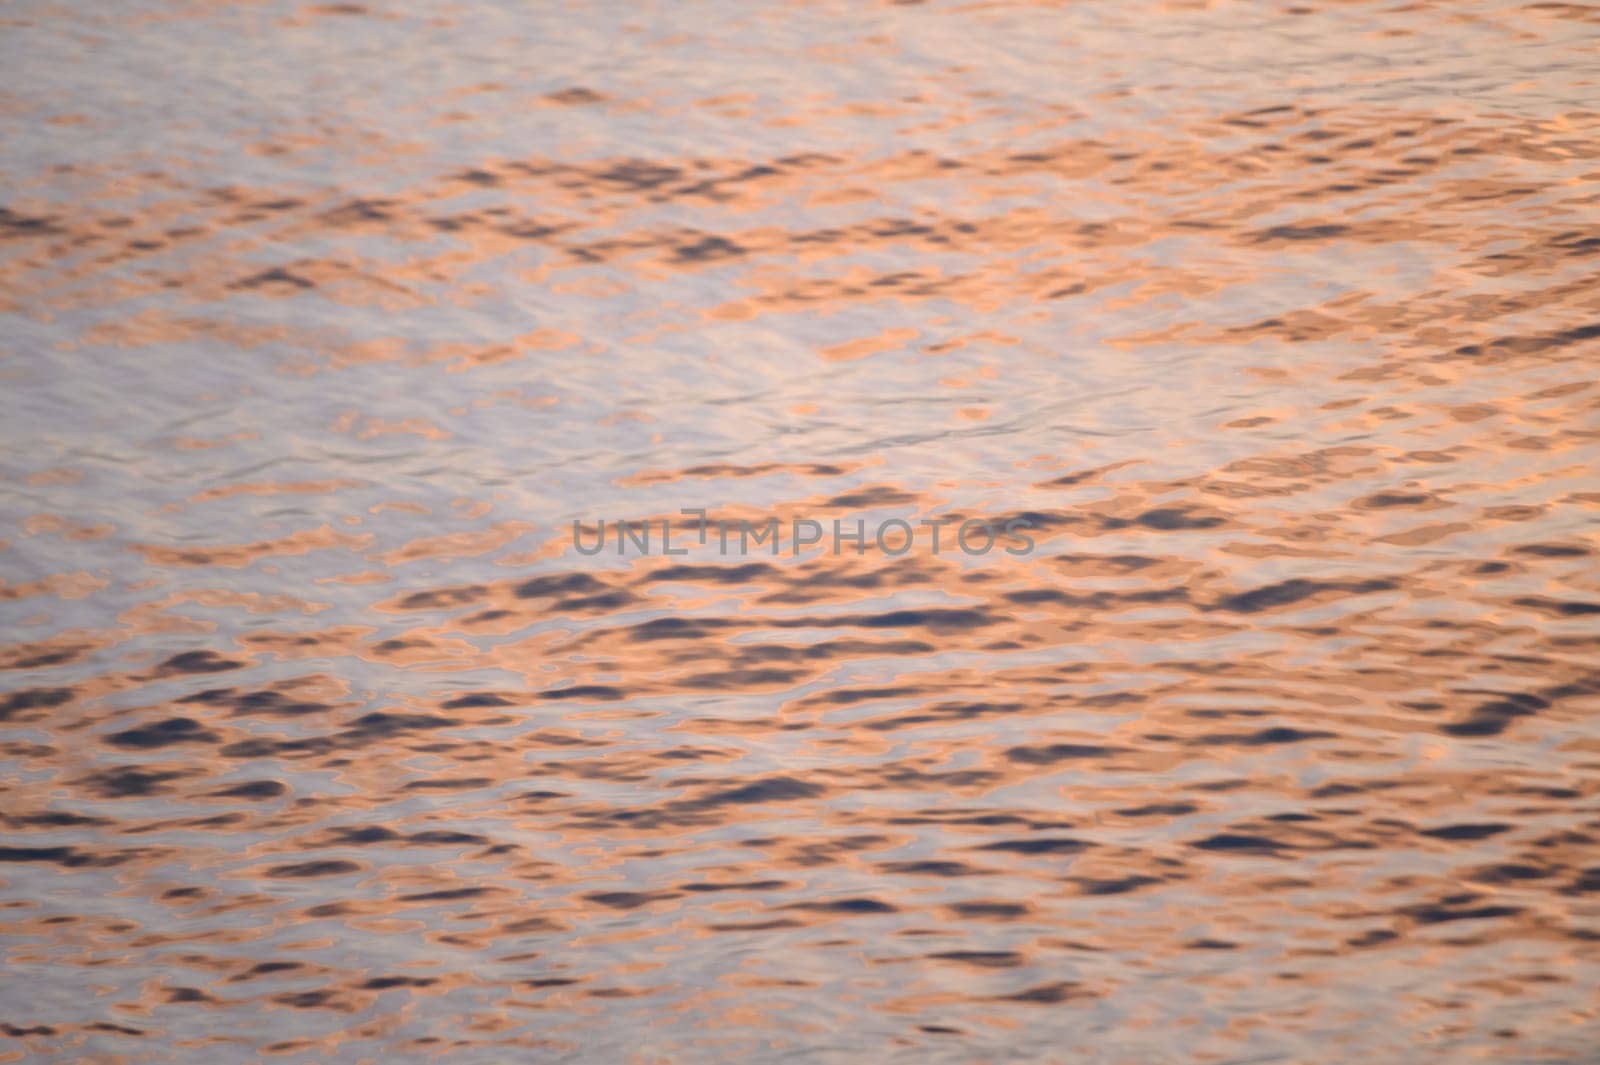 reflection of the sunset in the waters of the Mediterranean Sea